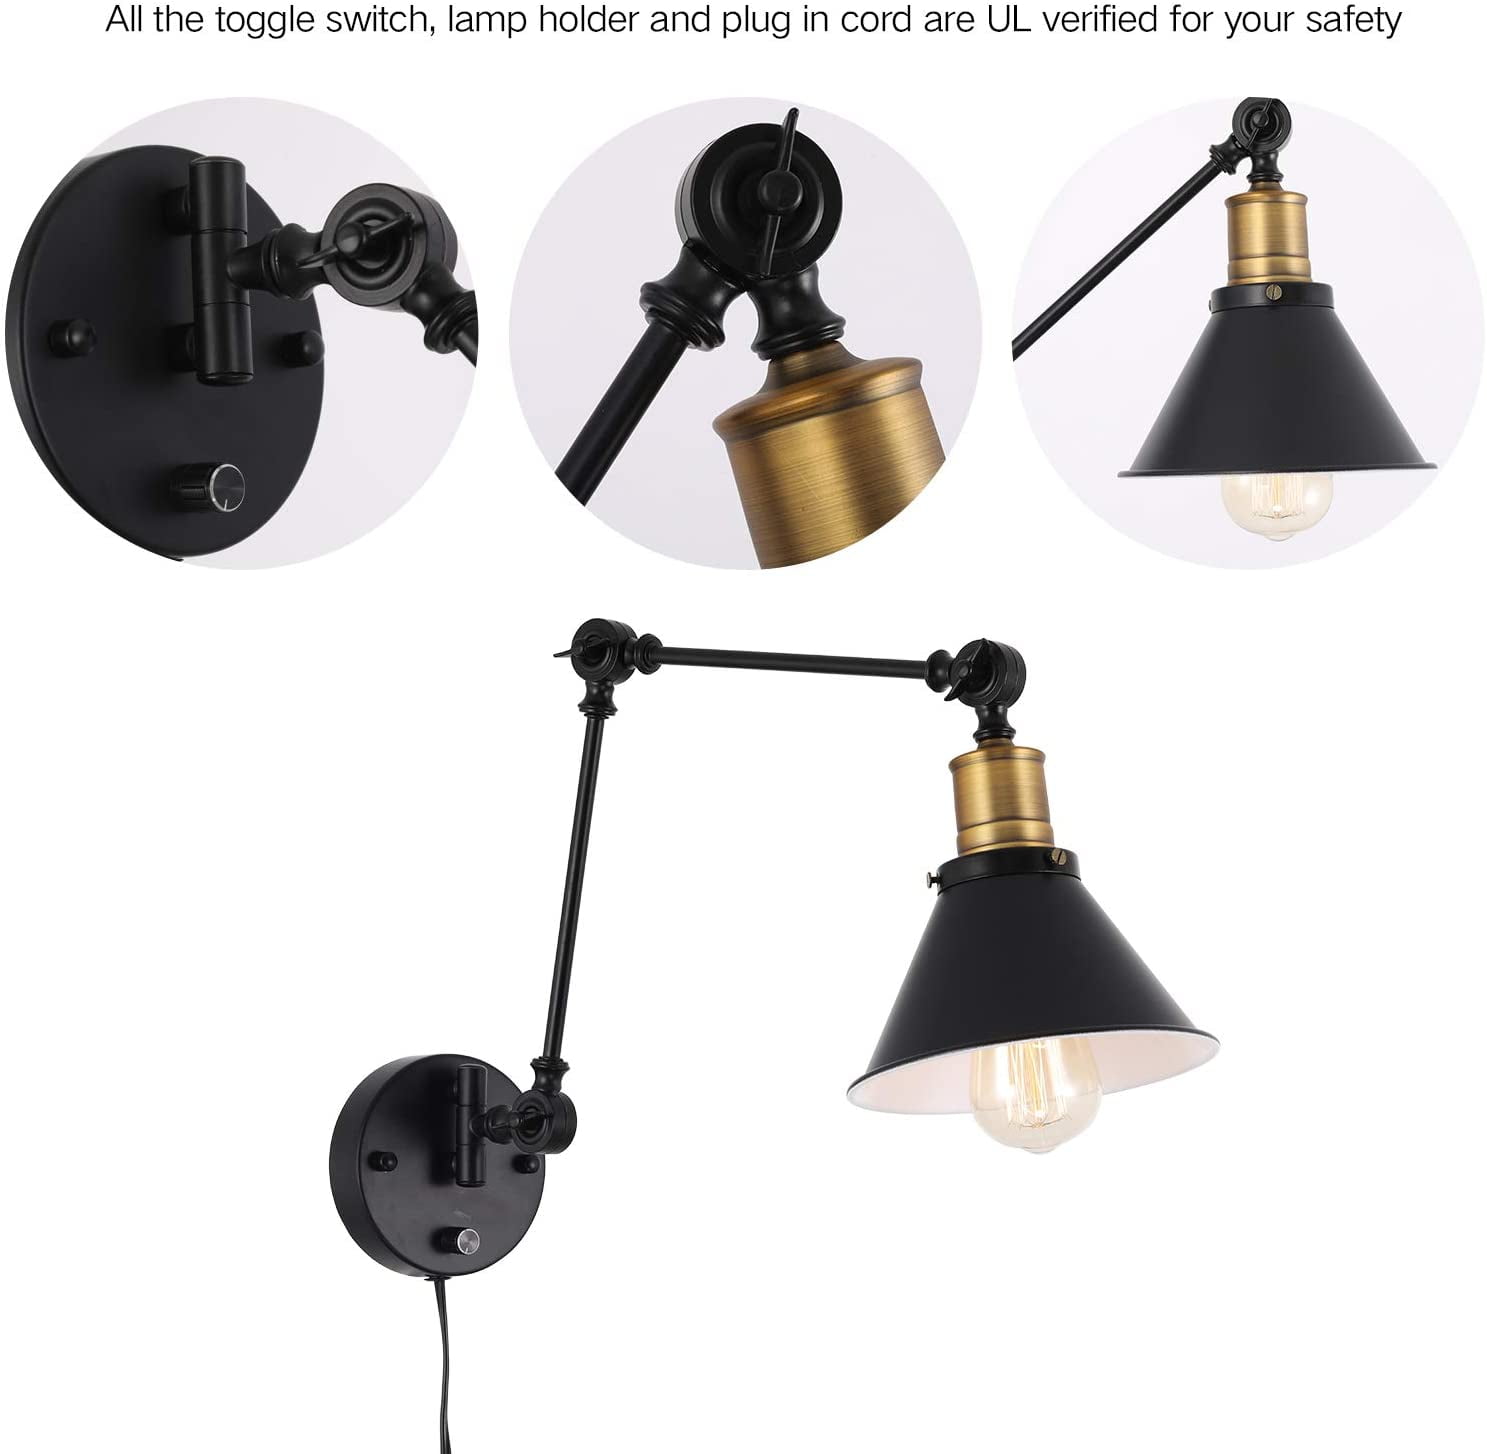 Black White Wrought iron LED AJ Wall lamp Adjustable Wall light With plug switch 